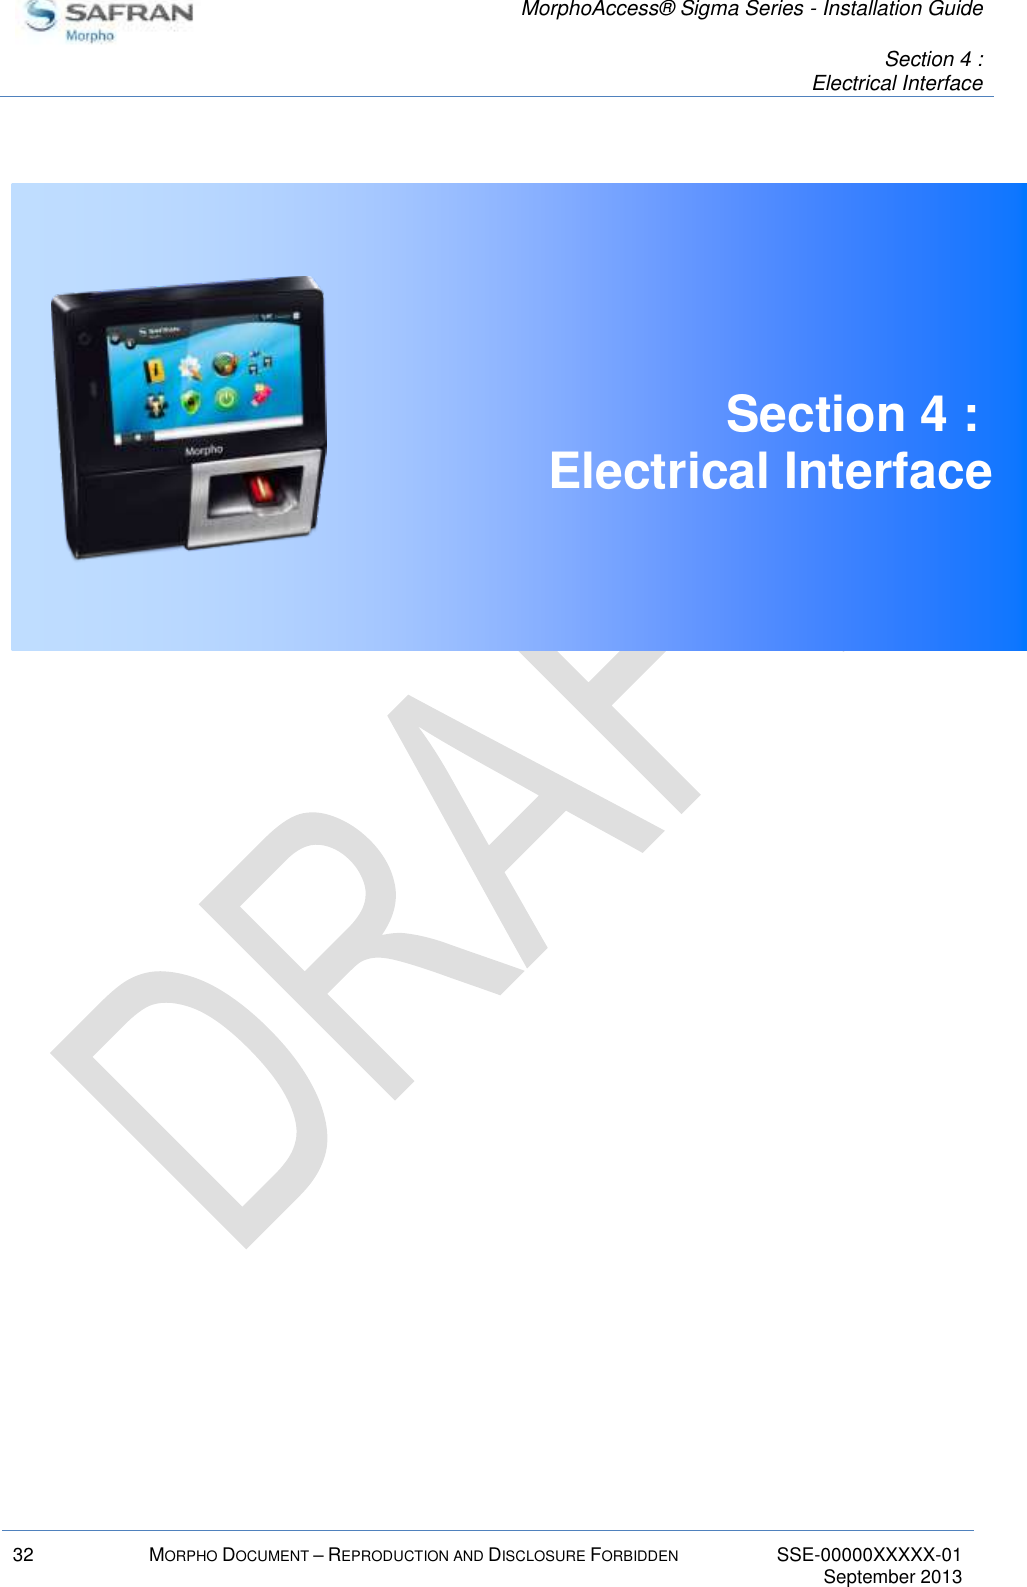   MorphoAccess® Sigma Series - Installation Guide   Section 4 : Electrical Interface  32 MORPHO DOCUMENT – REPRODUCTION AND DISCLOSURE FORBIDDEN SSE-00000XXXXX-01   September 2013   Section 4 :  Electrical Interface     